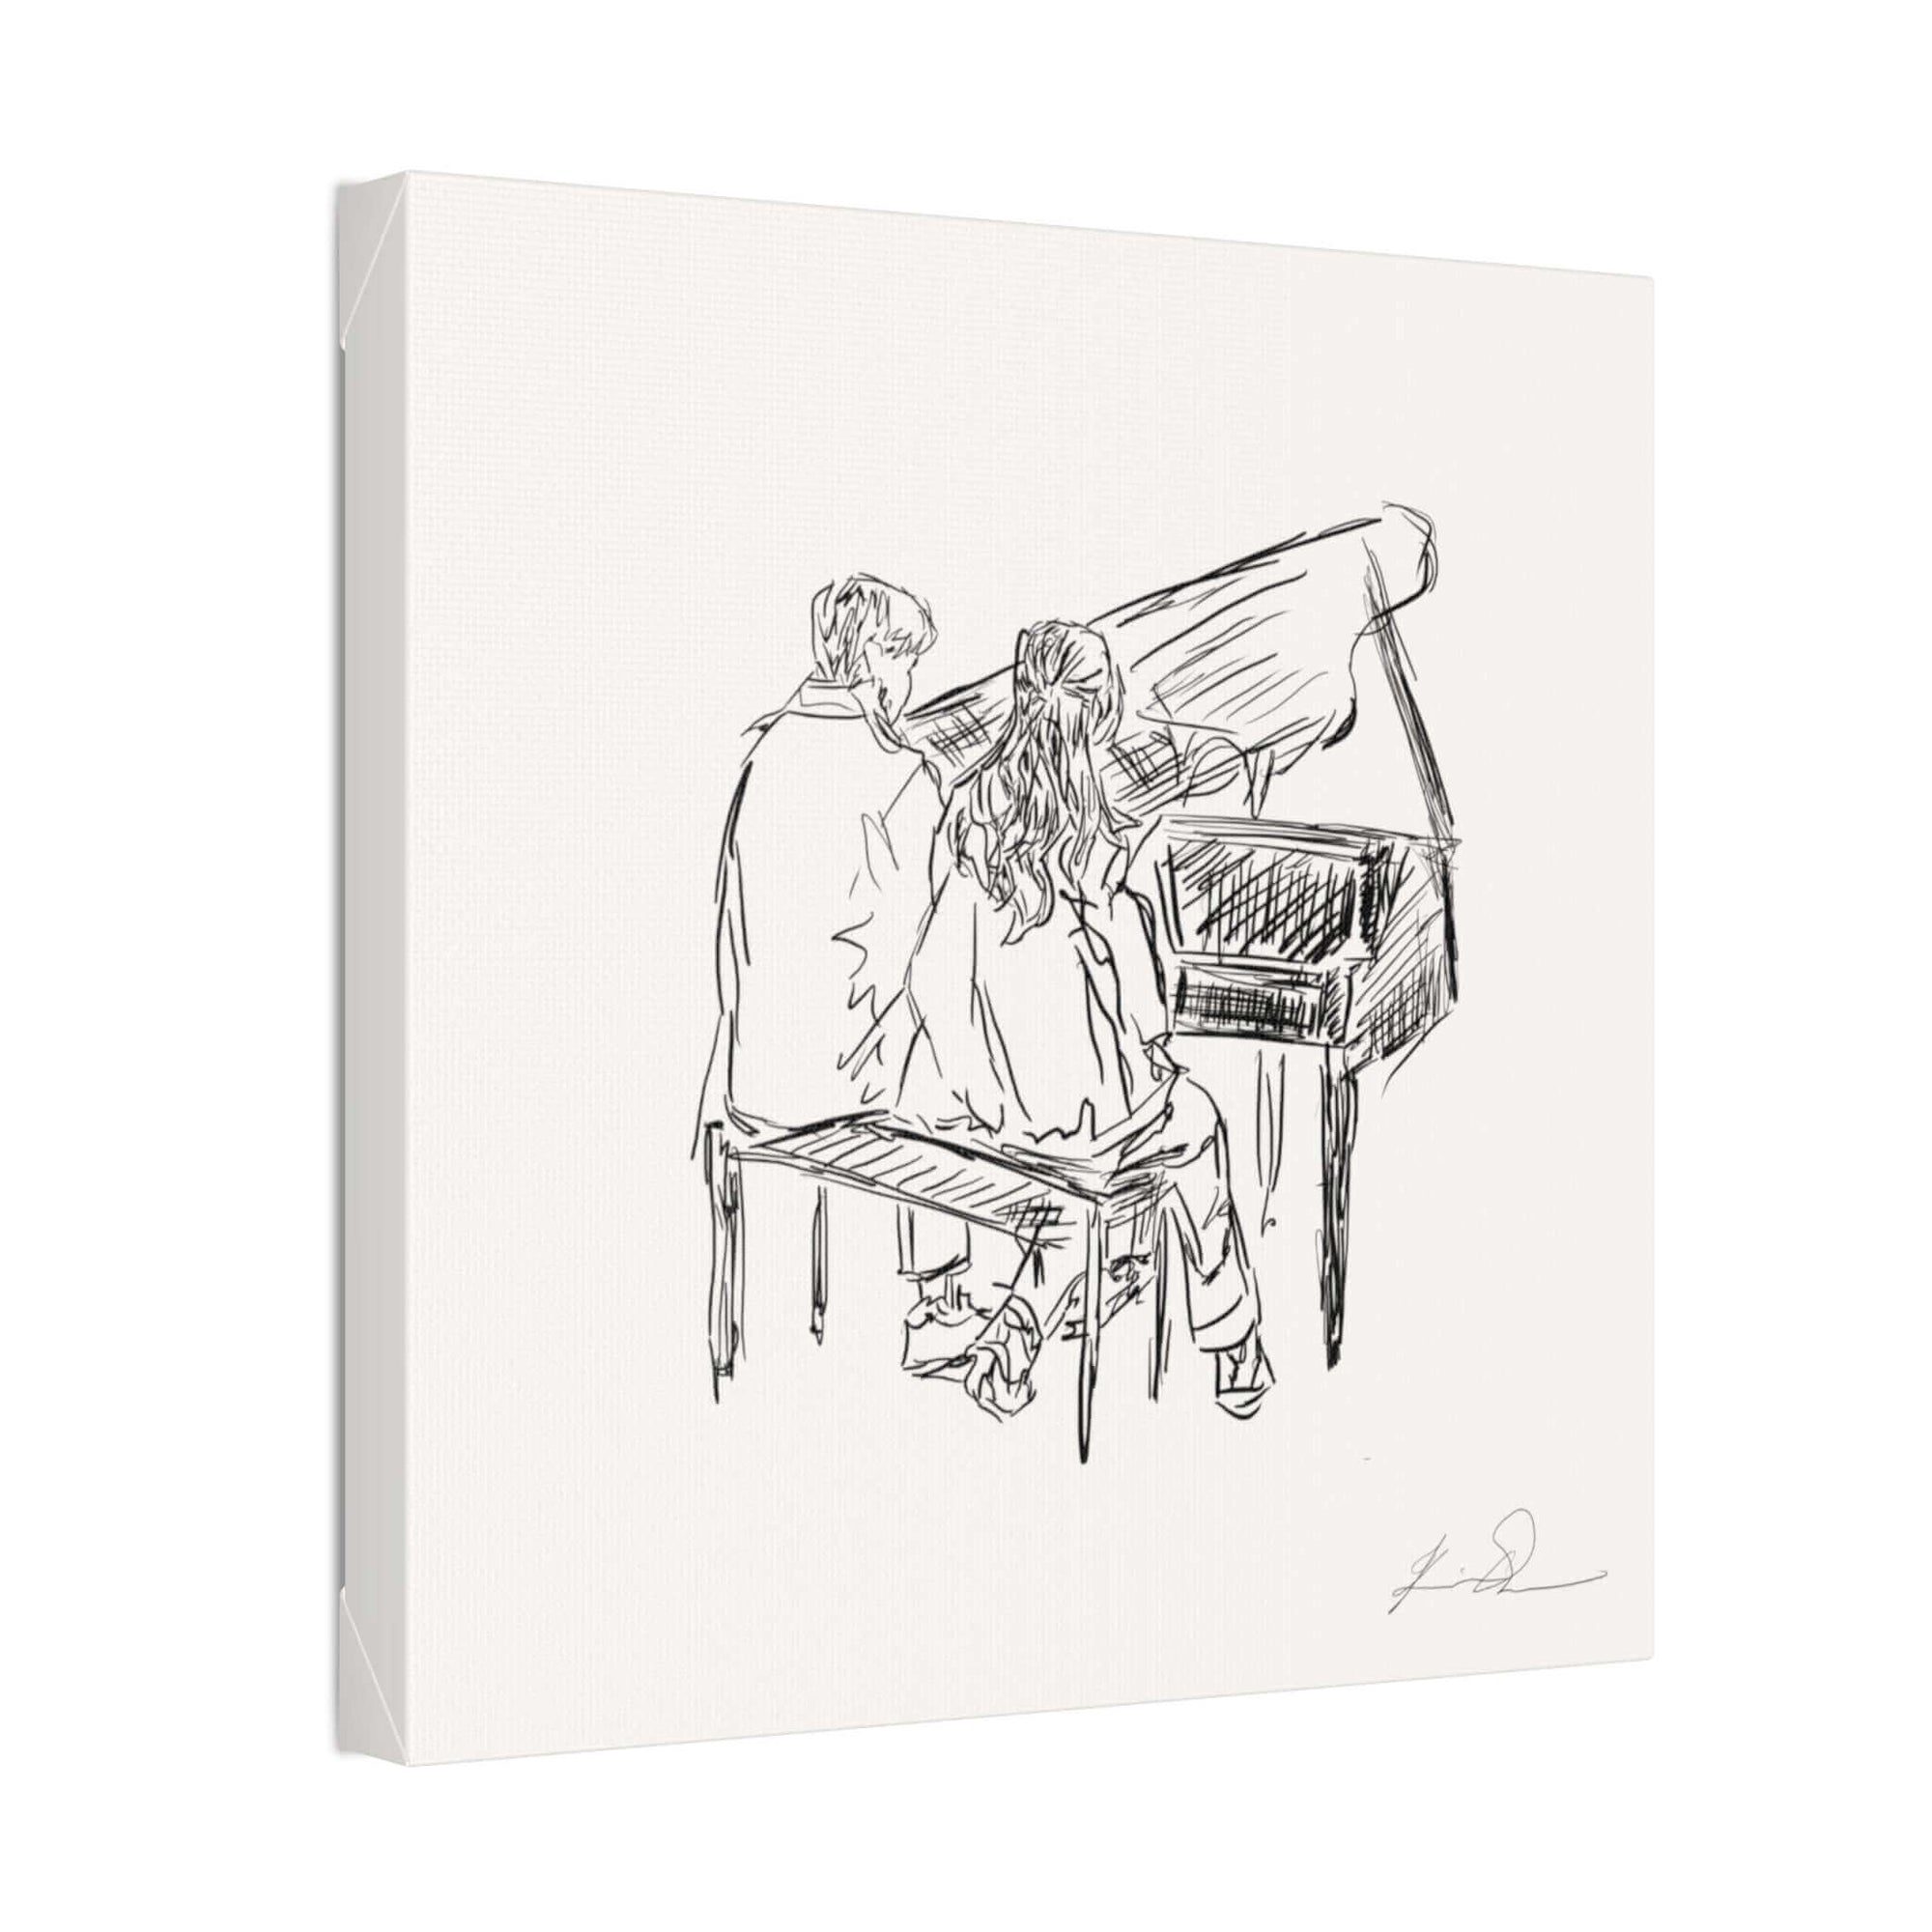 Sketch of two people playing a grand piano, displayed on a white canvas.